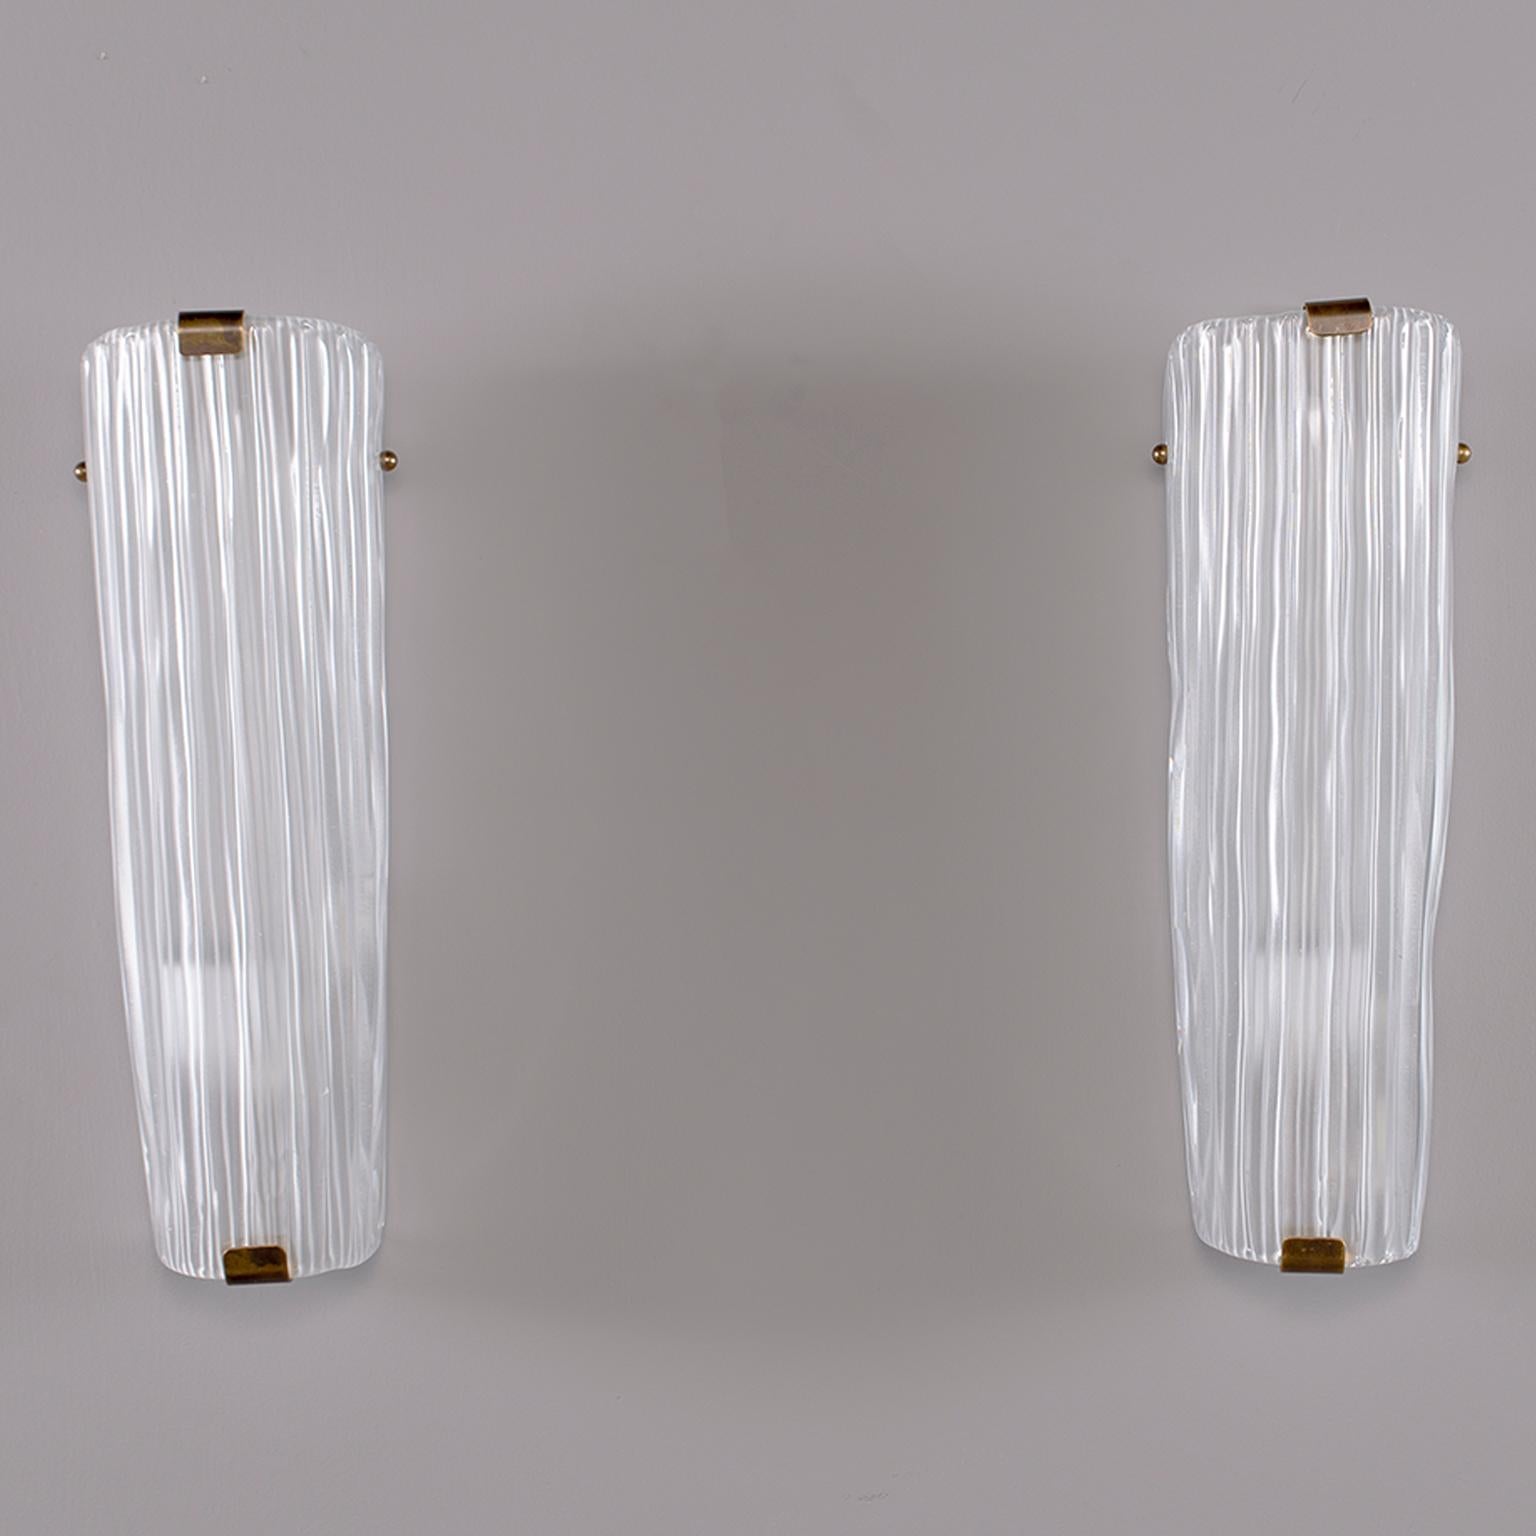 Murano glass sconces are tall and narrow with a ridged or fluted surface and flare slightly wider at the top, circa 1970s. Brass hardware have one full sized socket. Rewired for US electrical standards.